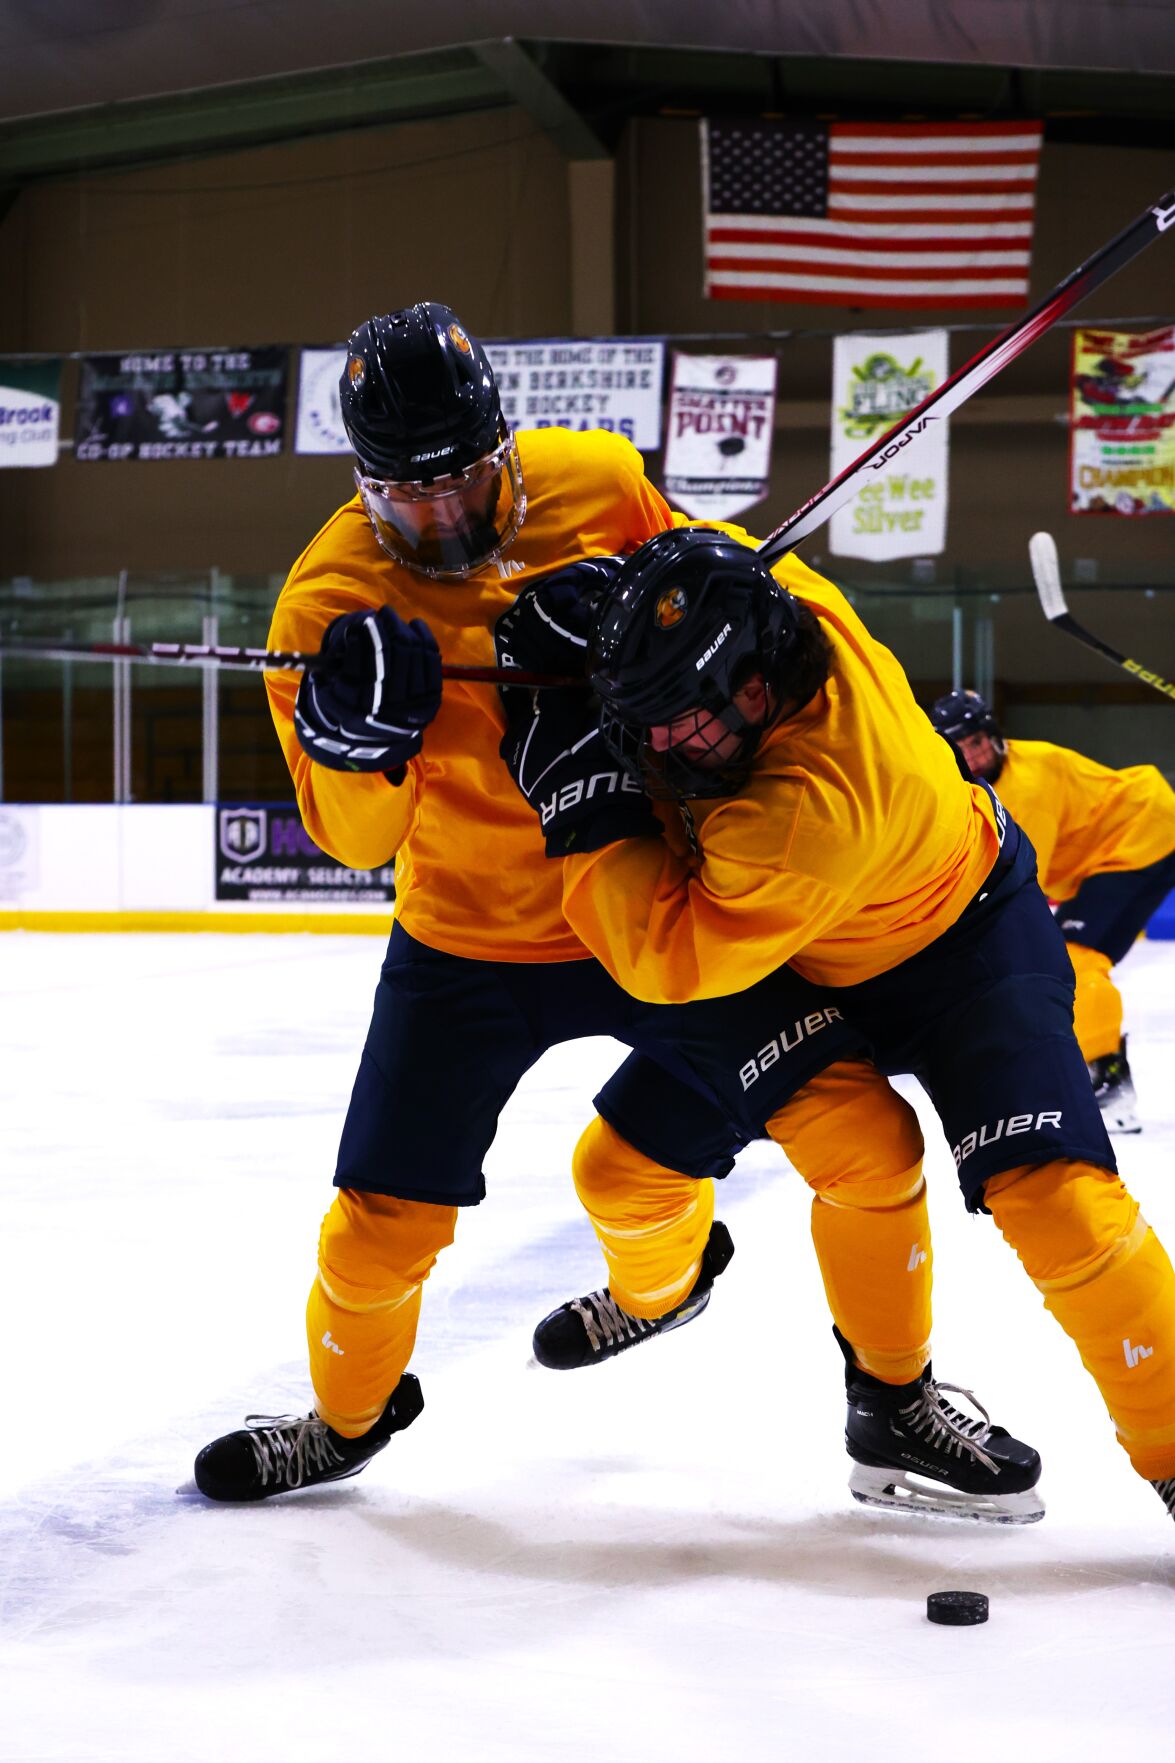 After 20 years off the ice, the MCLA mens hockey program is skating again in training camp Sports berkshireeagle